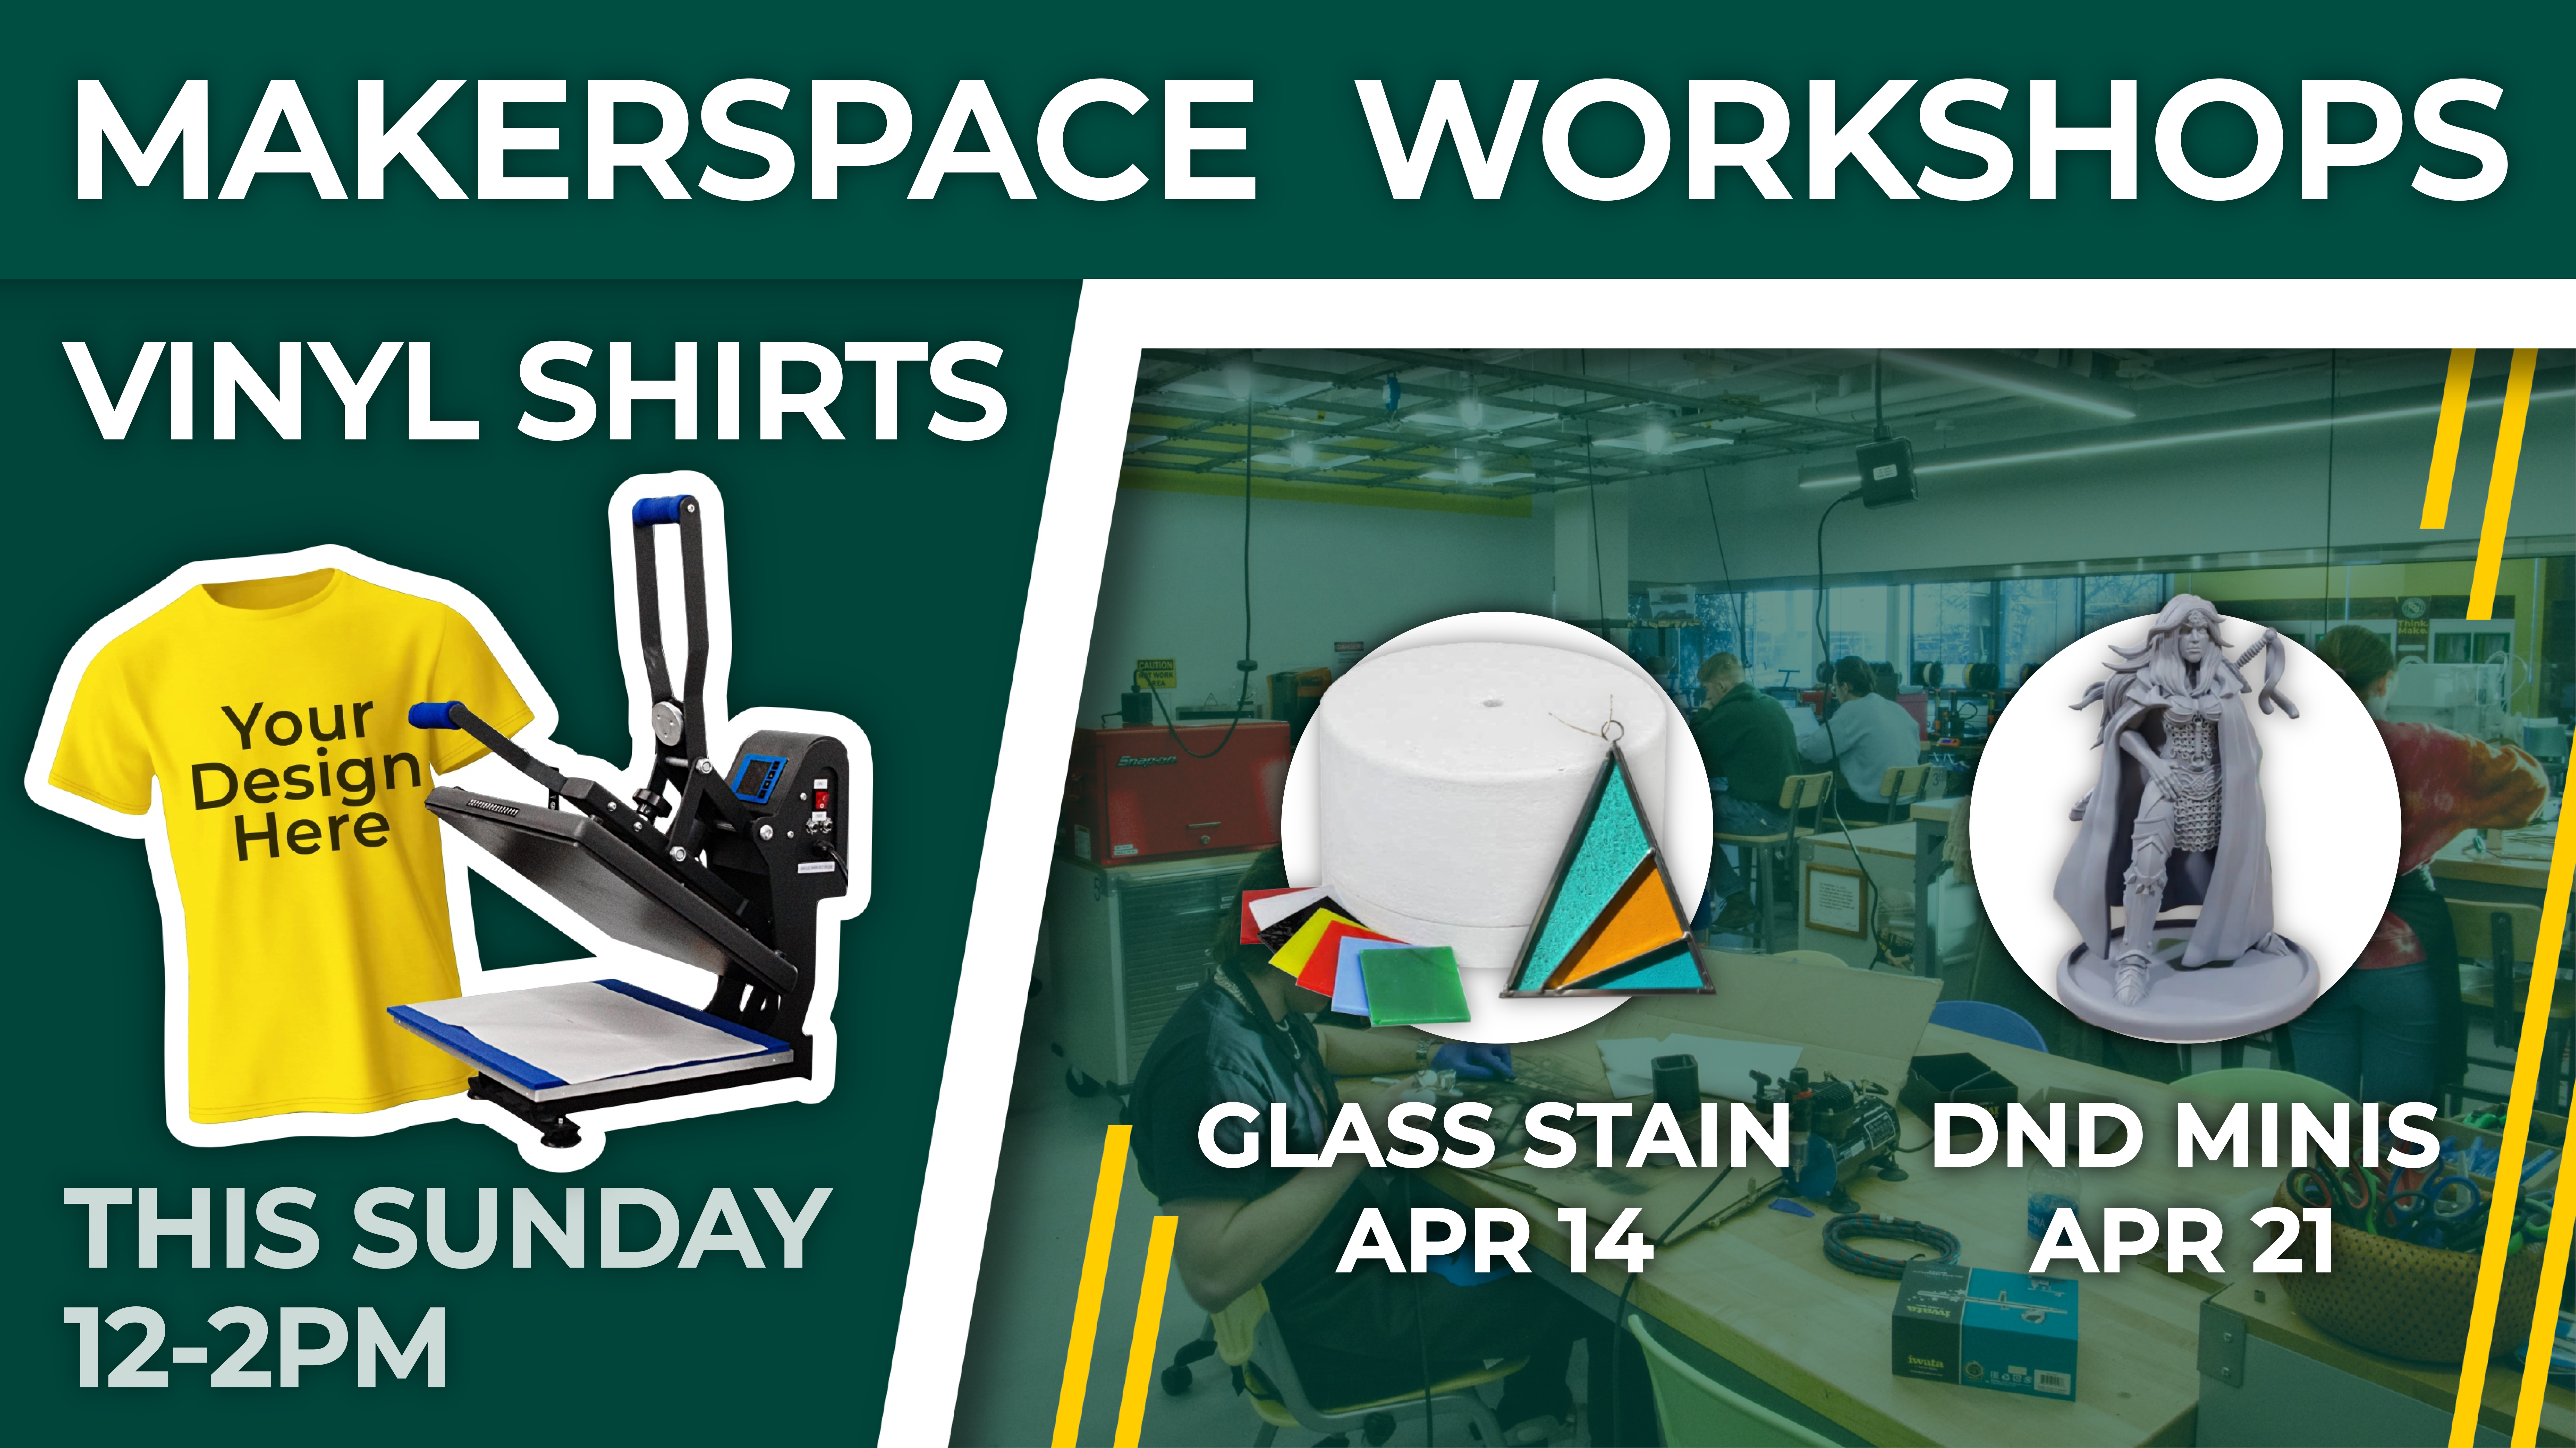 Makerspace workshops. This Sunday from 12-2pm, Glass stain April 14, DND Minis April 21.